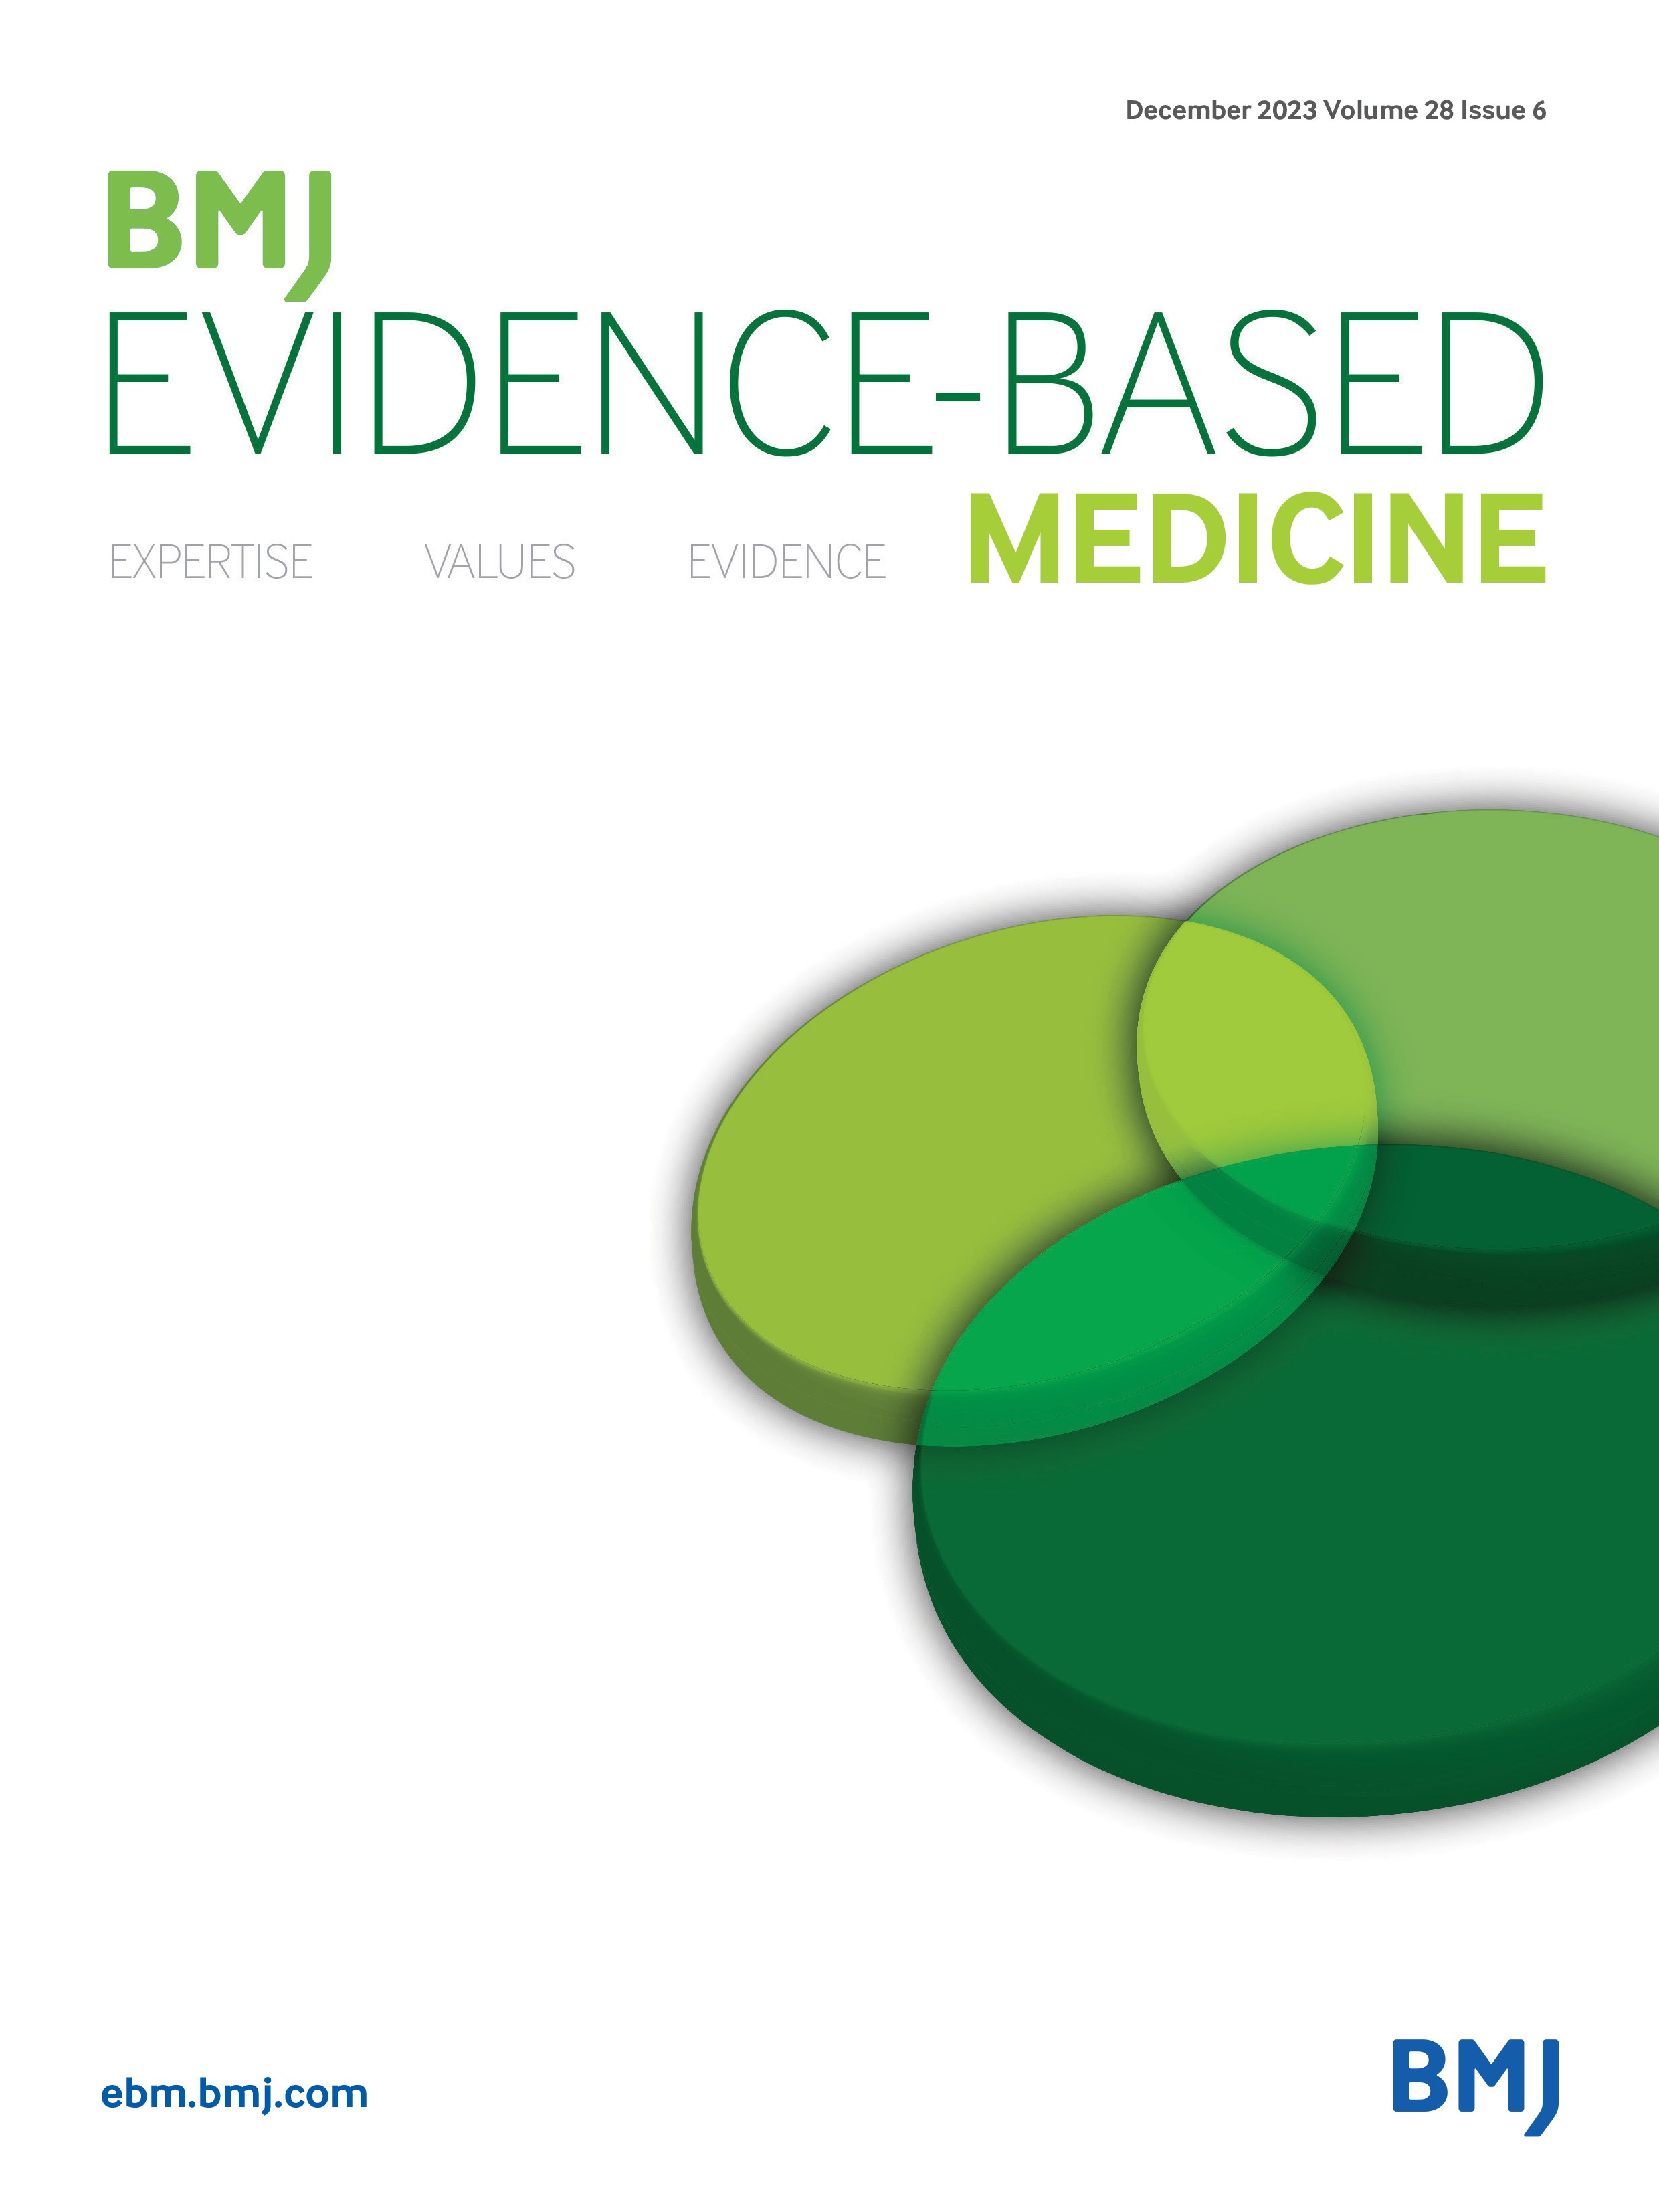 Bias, quality and reporting in health research: differences and tools for appraisal